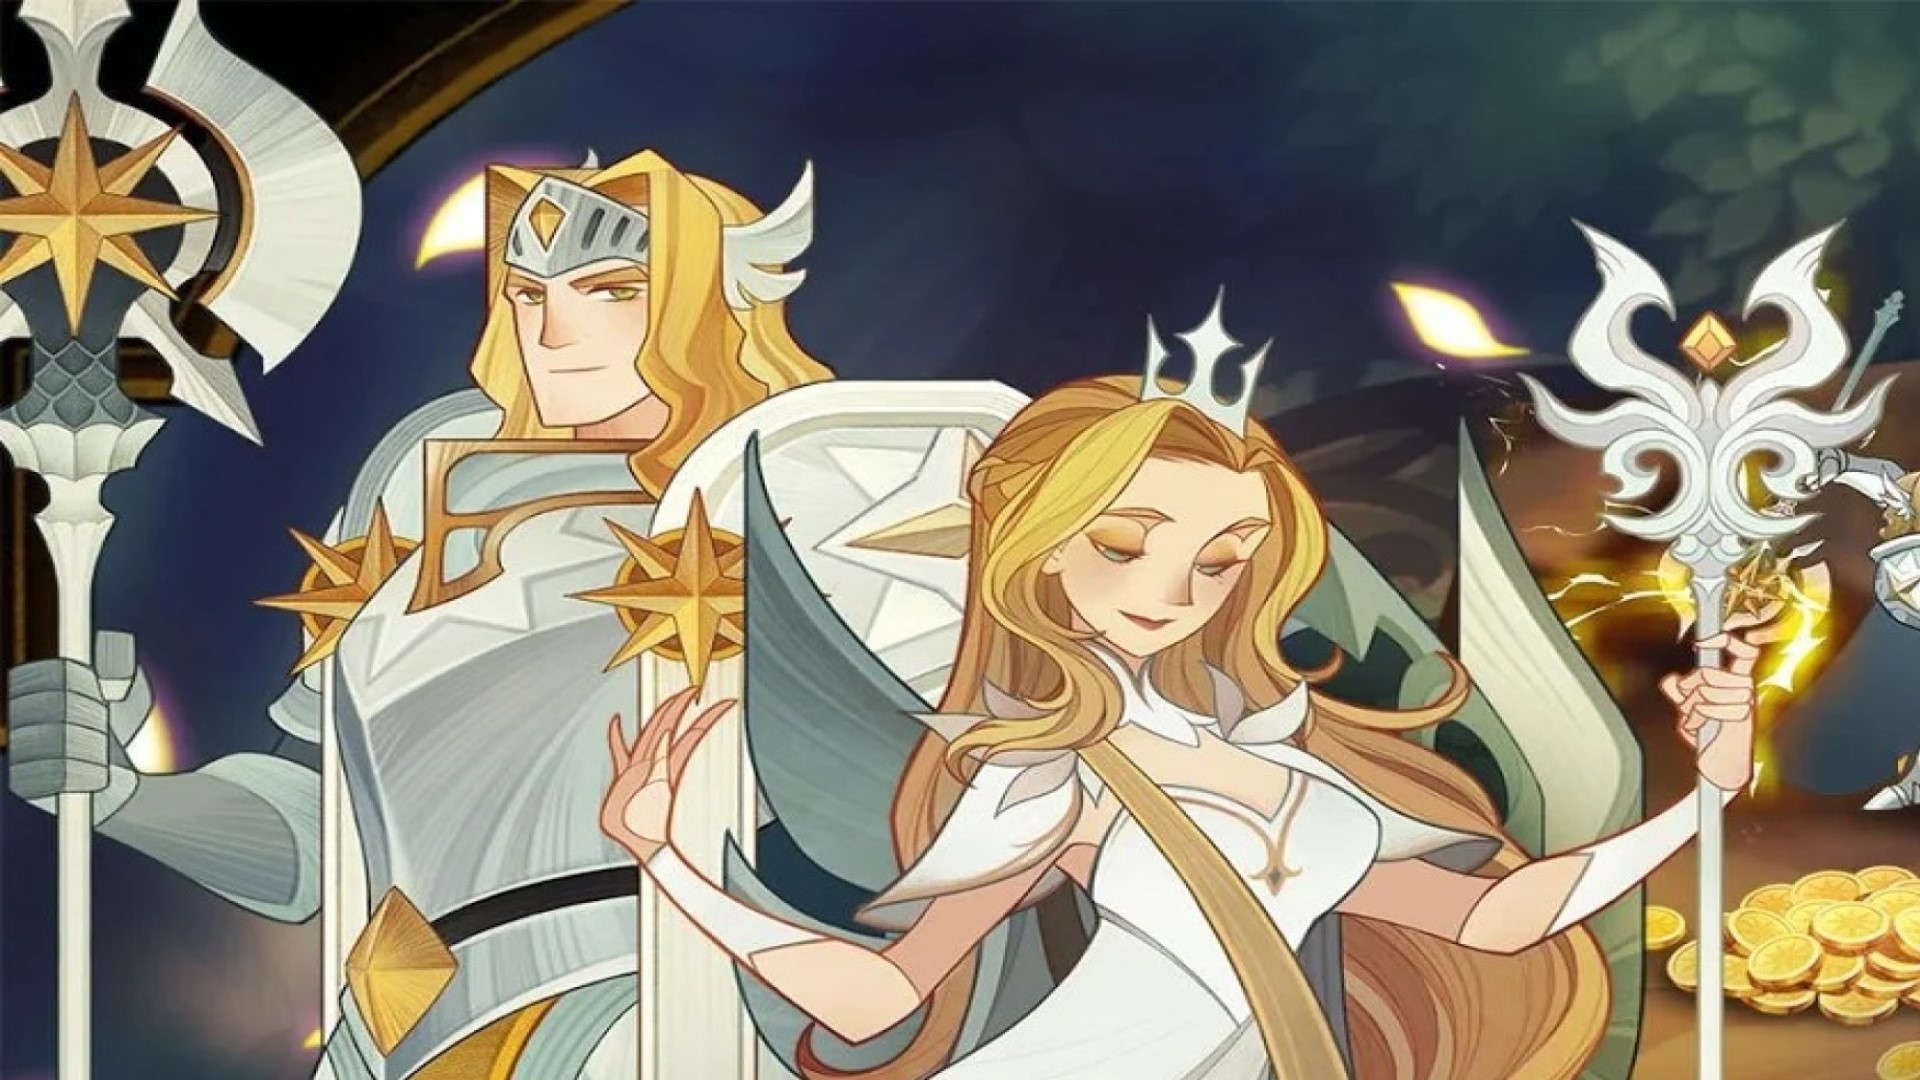 Best Android games: AFK Arena. Image shows two fantastical characters.